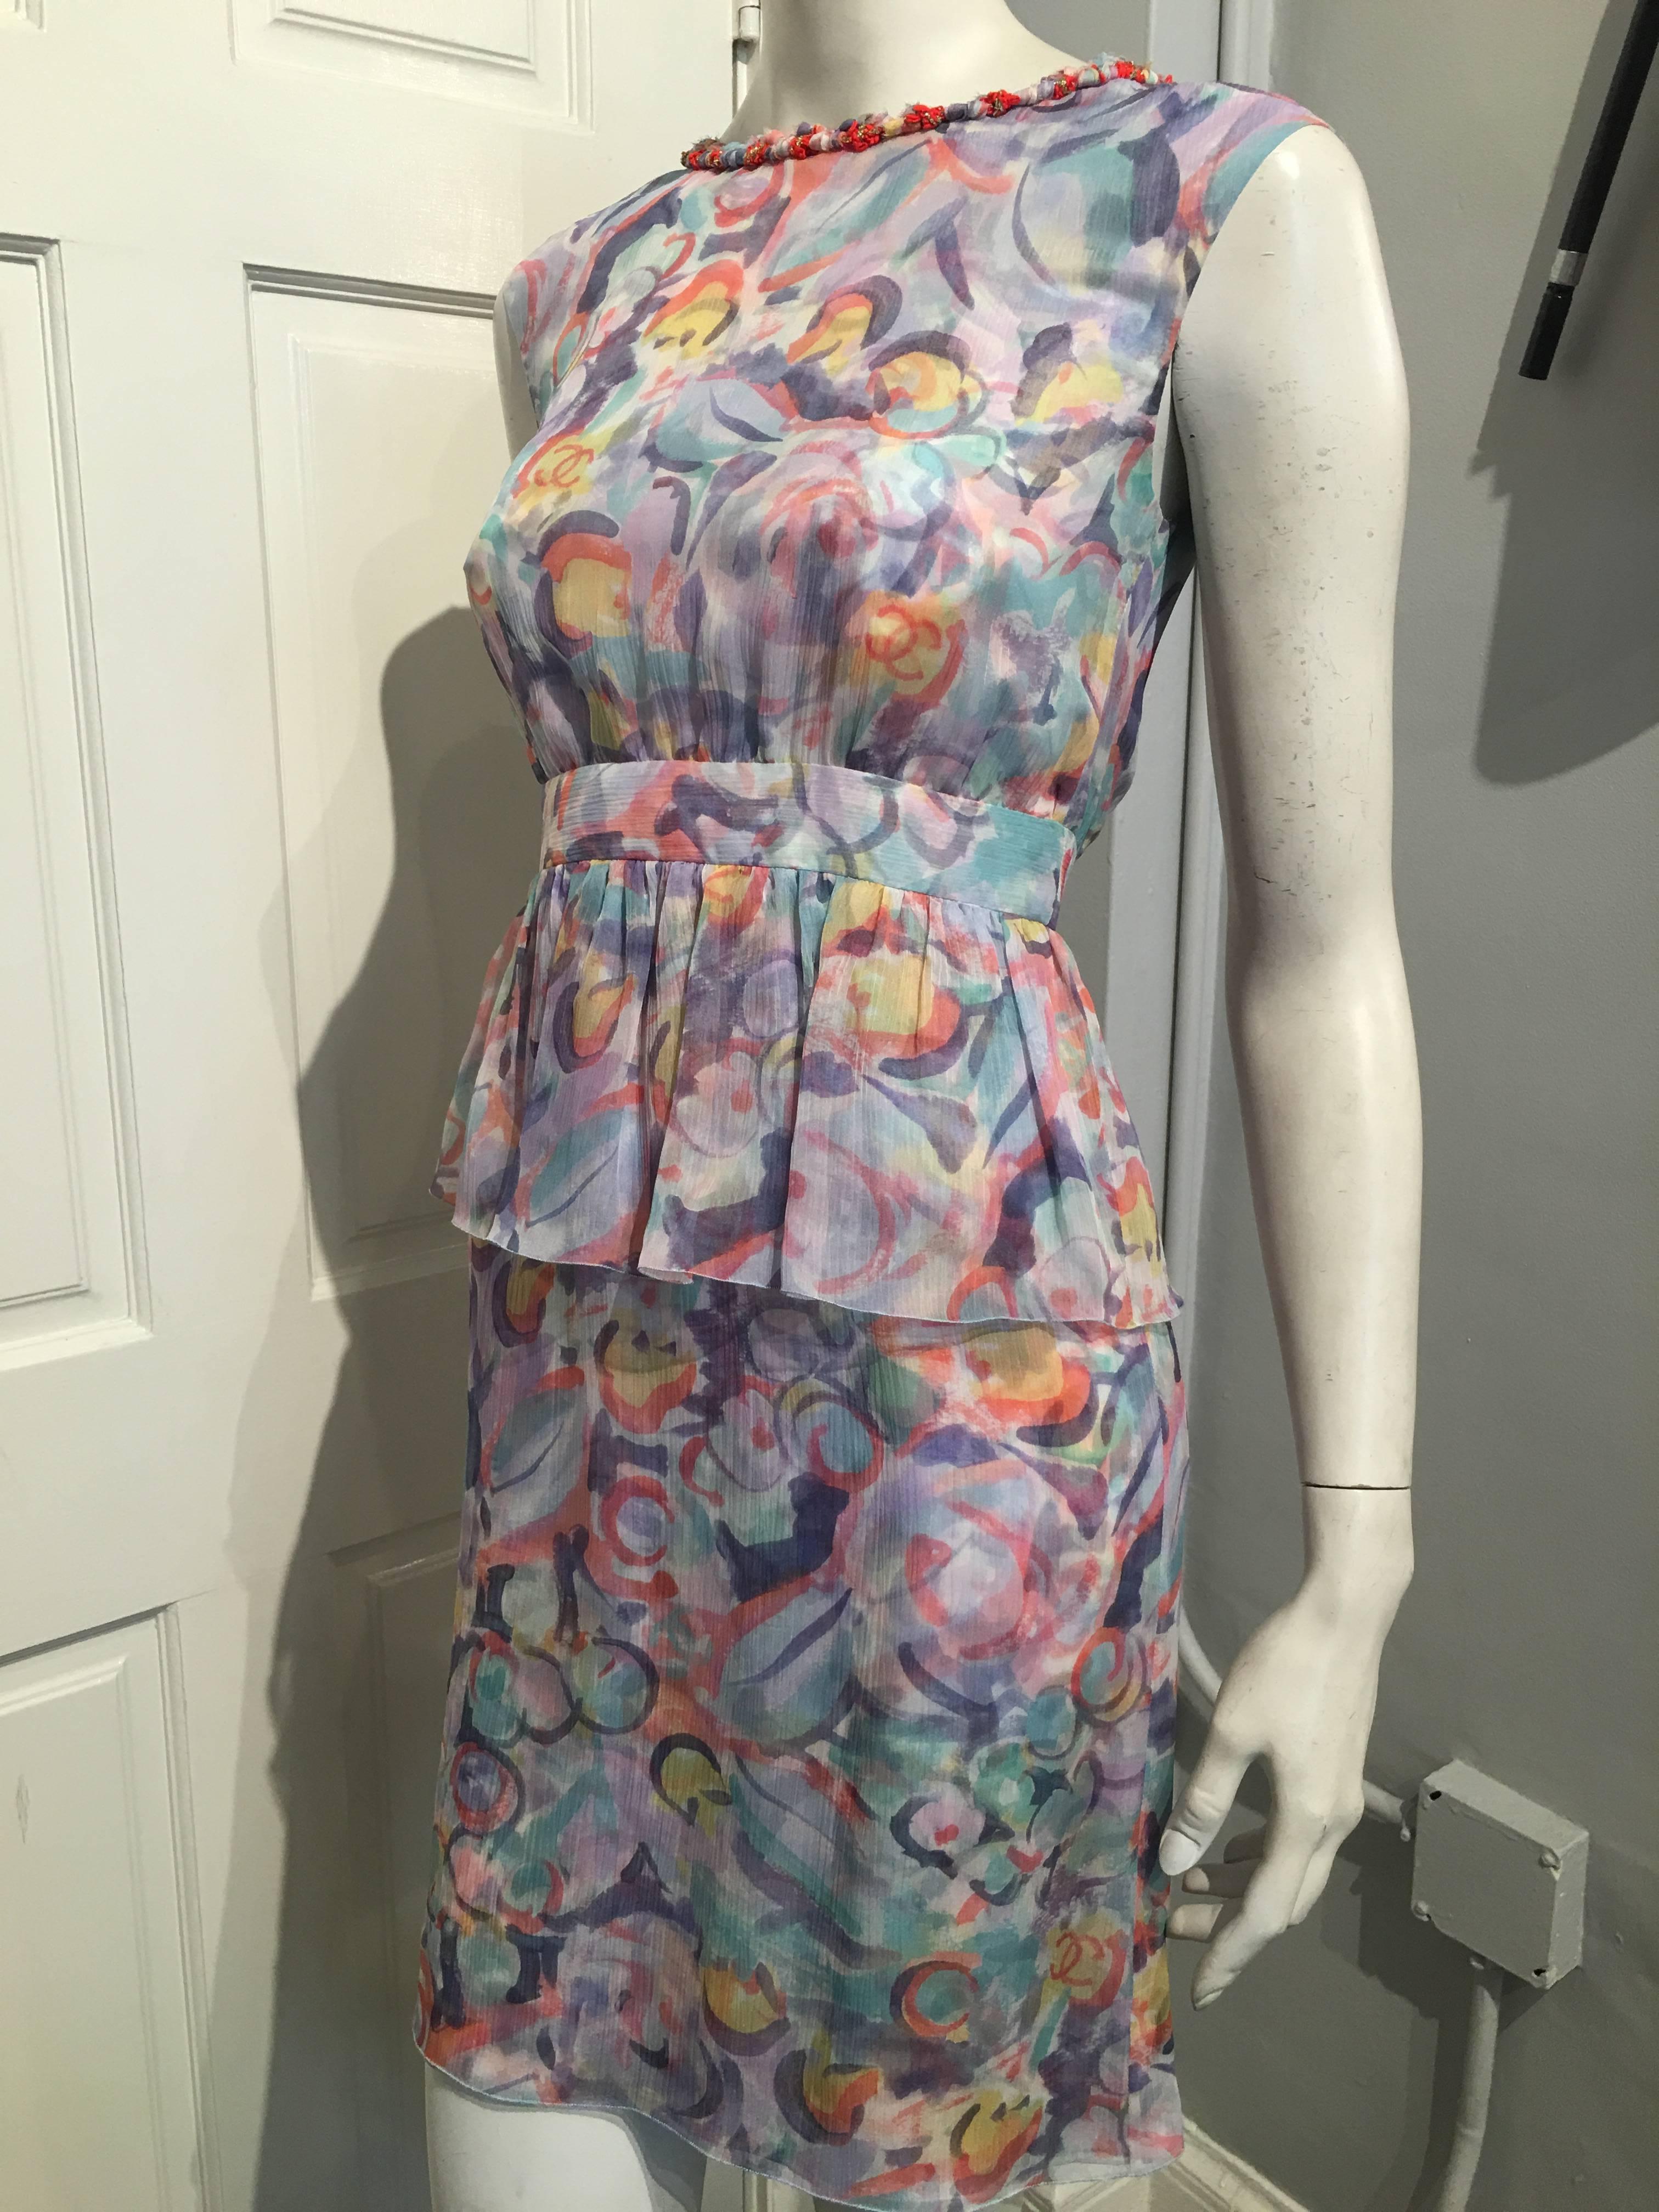 Chanel peplum dress in a pastel floral design on triple layered chiffon with a knotted ribbon accent in pastels, dark orange and gold metallic along the neckline. The dress has a fitted waistband with slightly gathered bodice, a 6.5